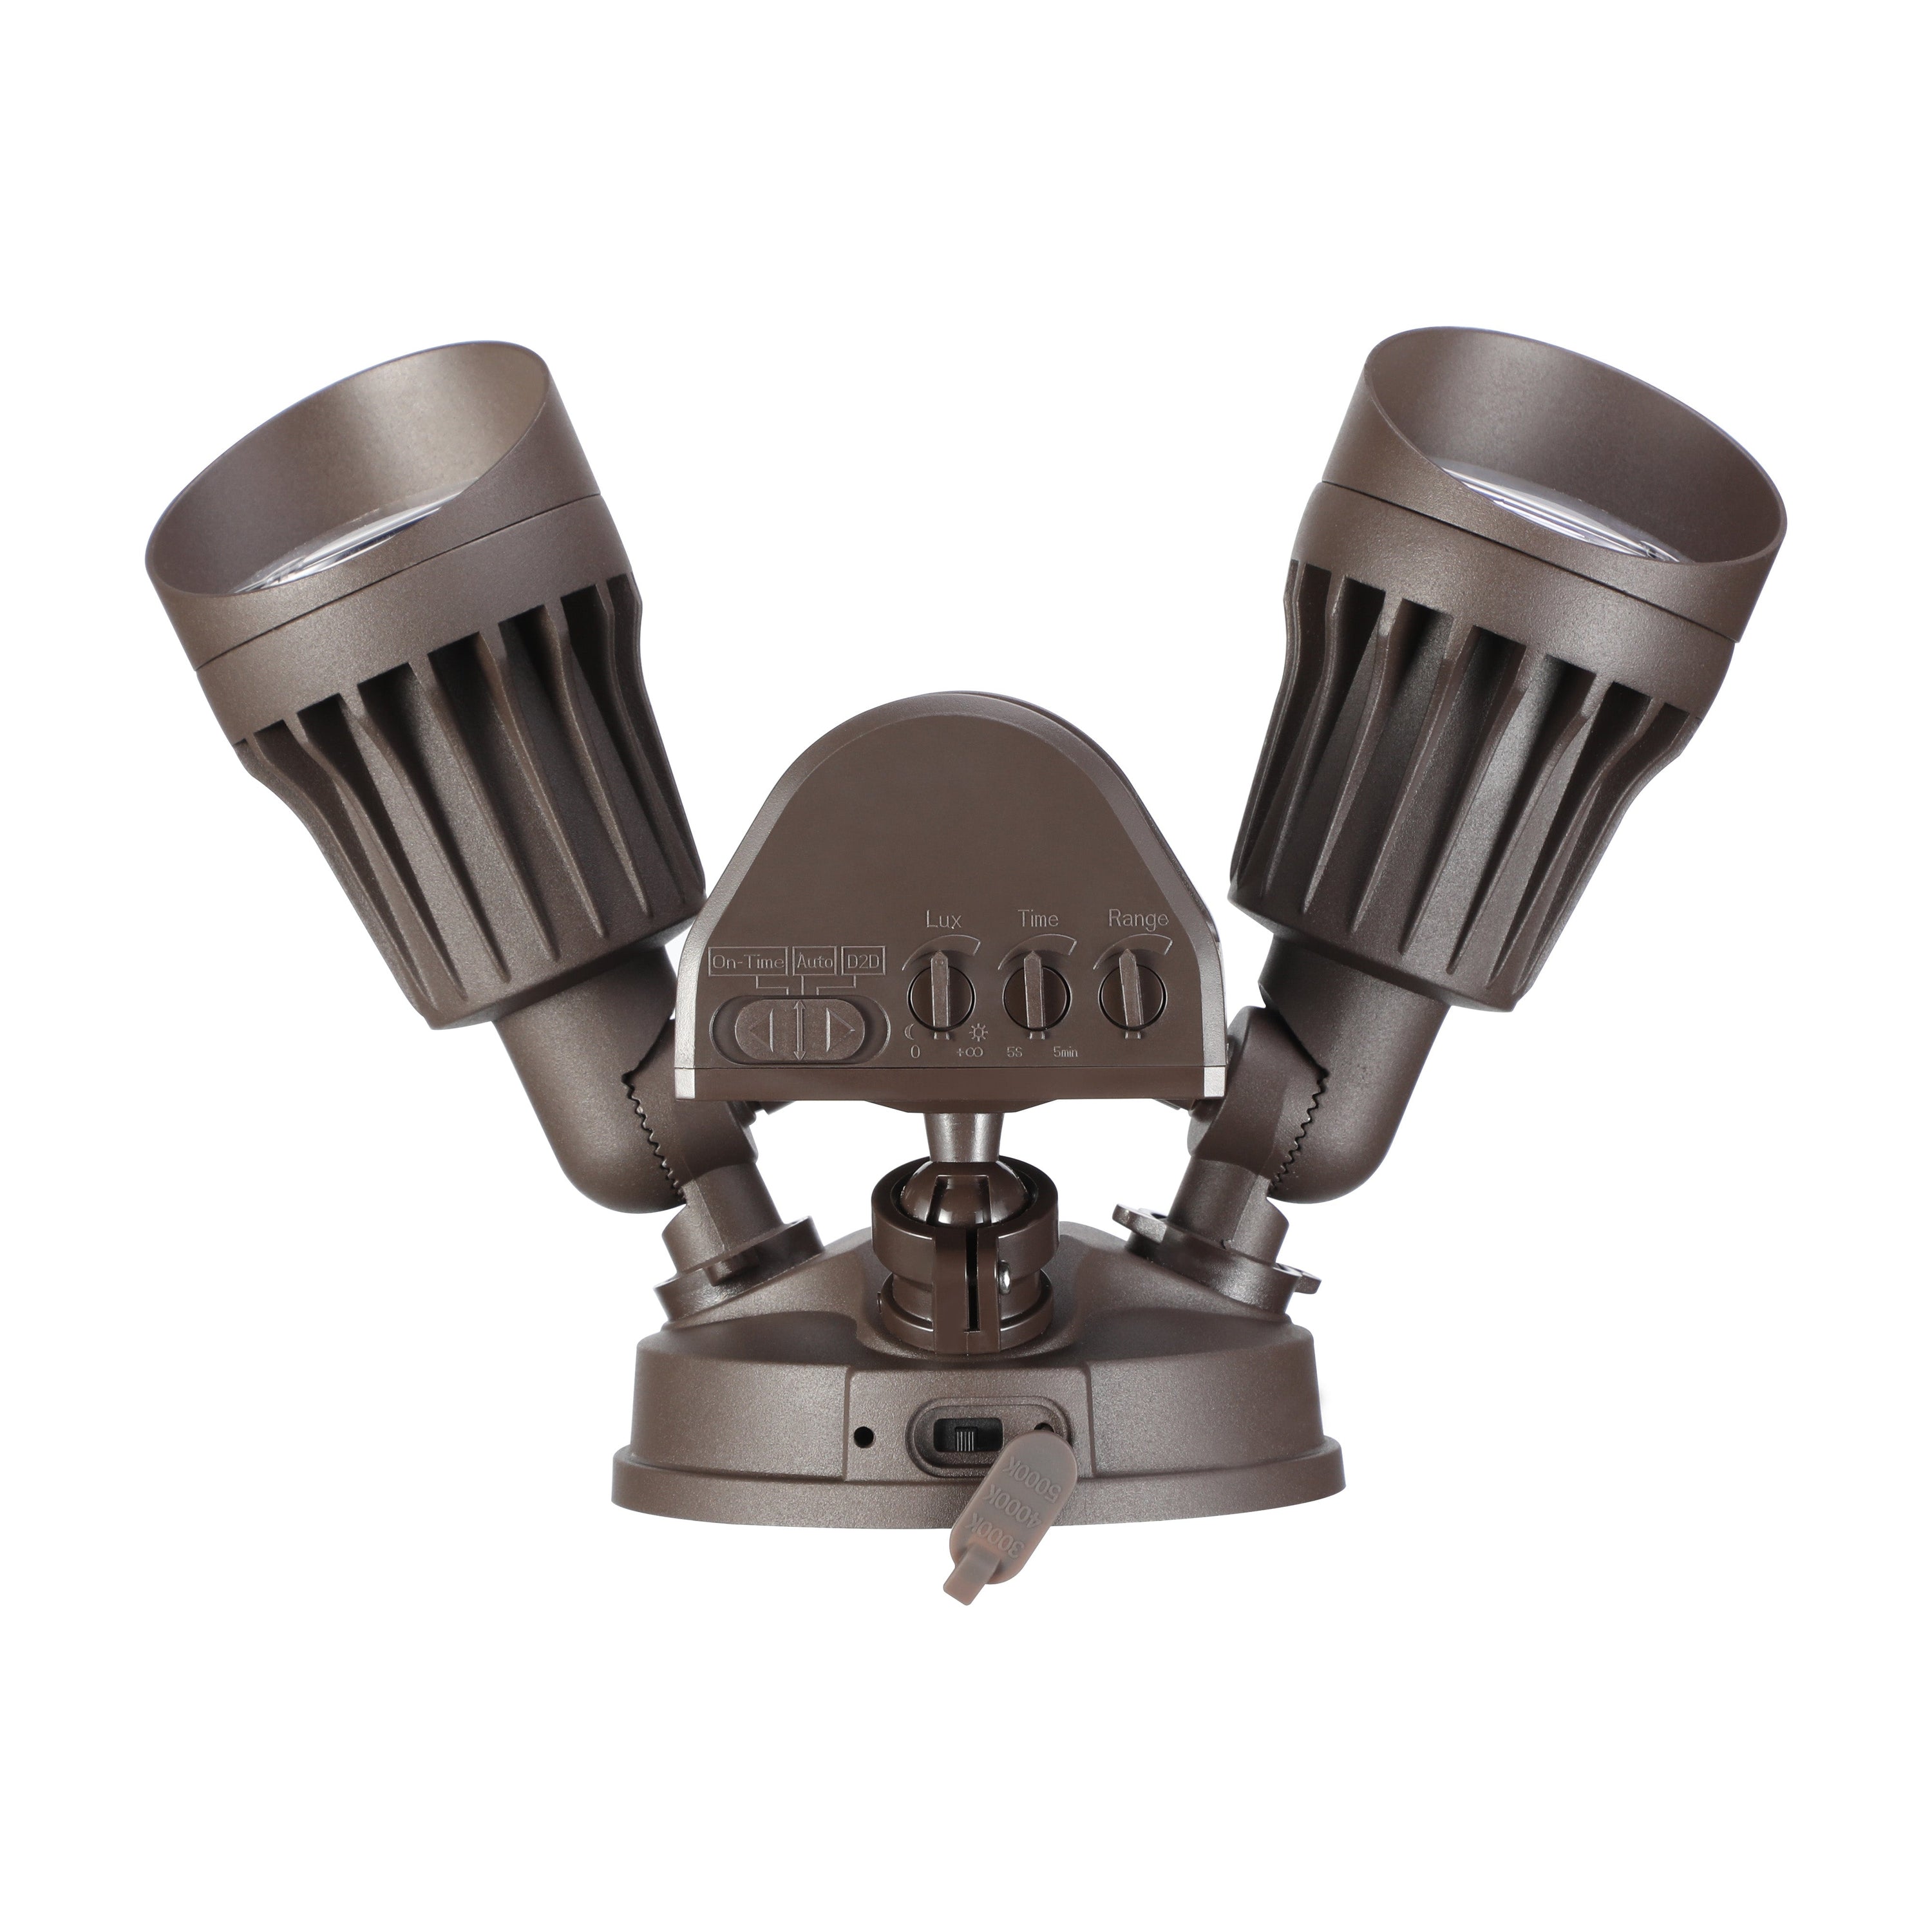 Watchman+ Dual-Heads 25W LED Security Light - Brown - Adjustable CCT